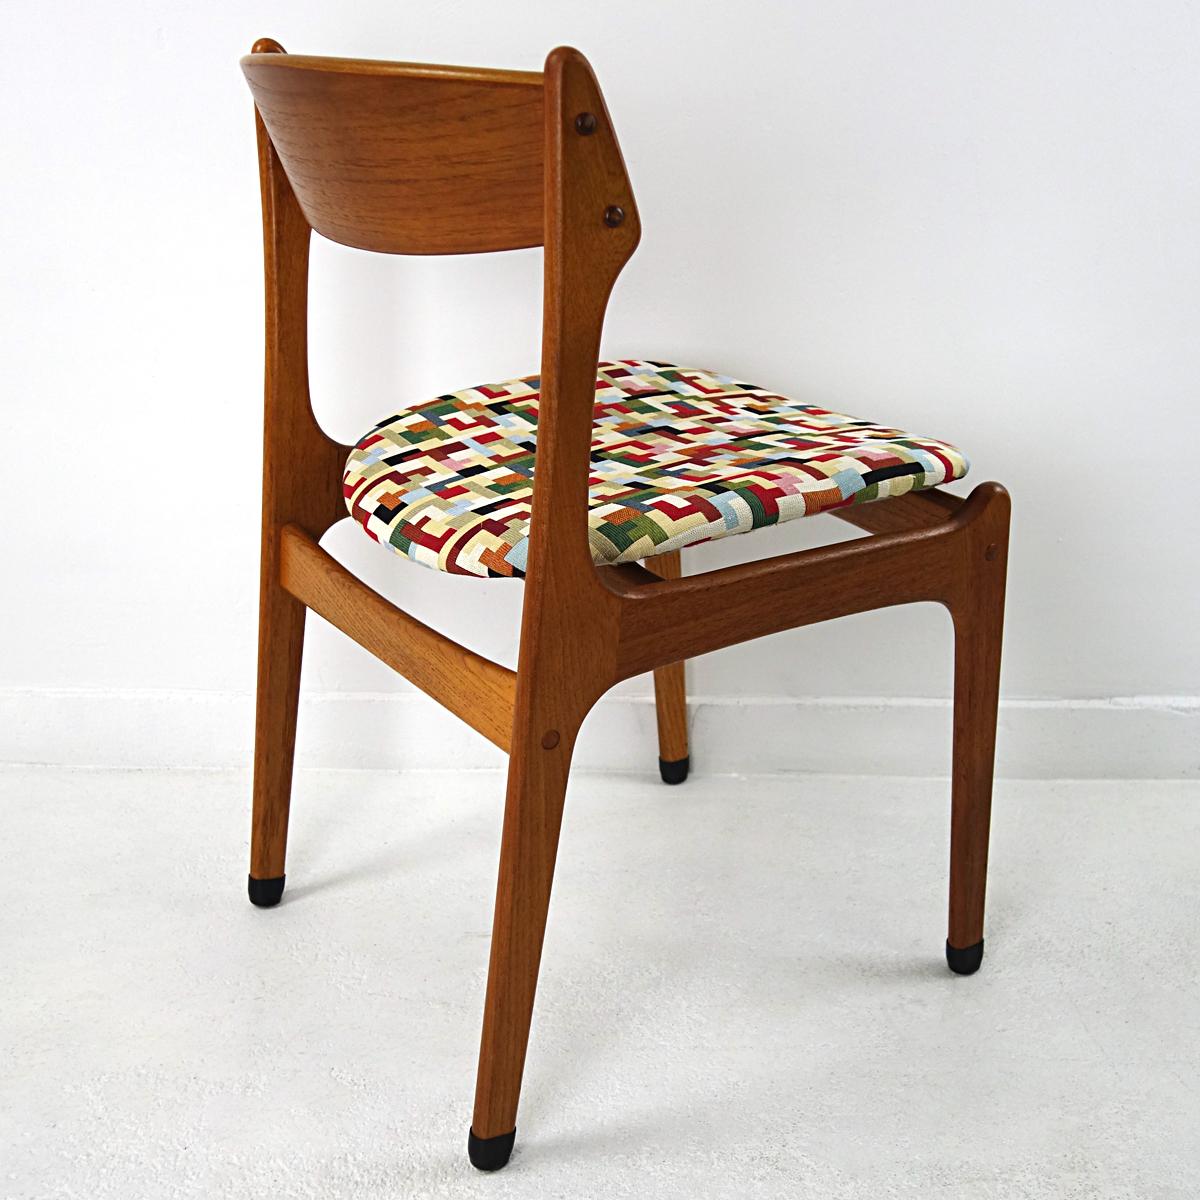 Mid-20th Century Set of 4 Mid-Century Modern Teak Wood Dining Chairs by Johannes Andersen For Sale